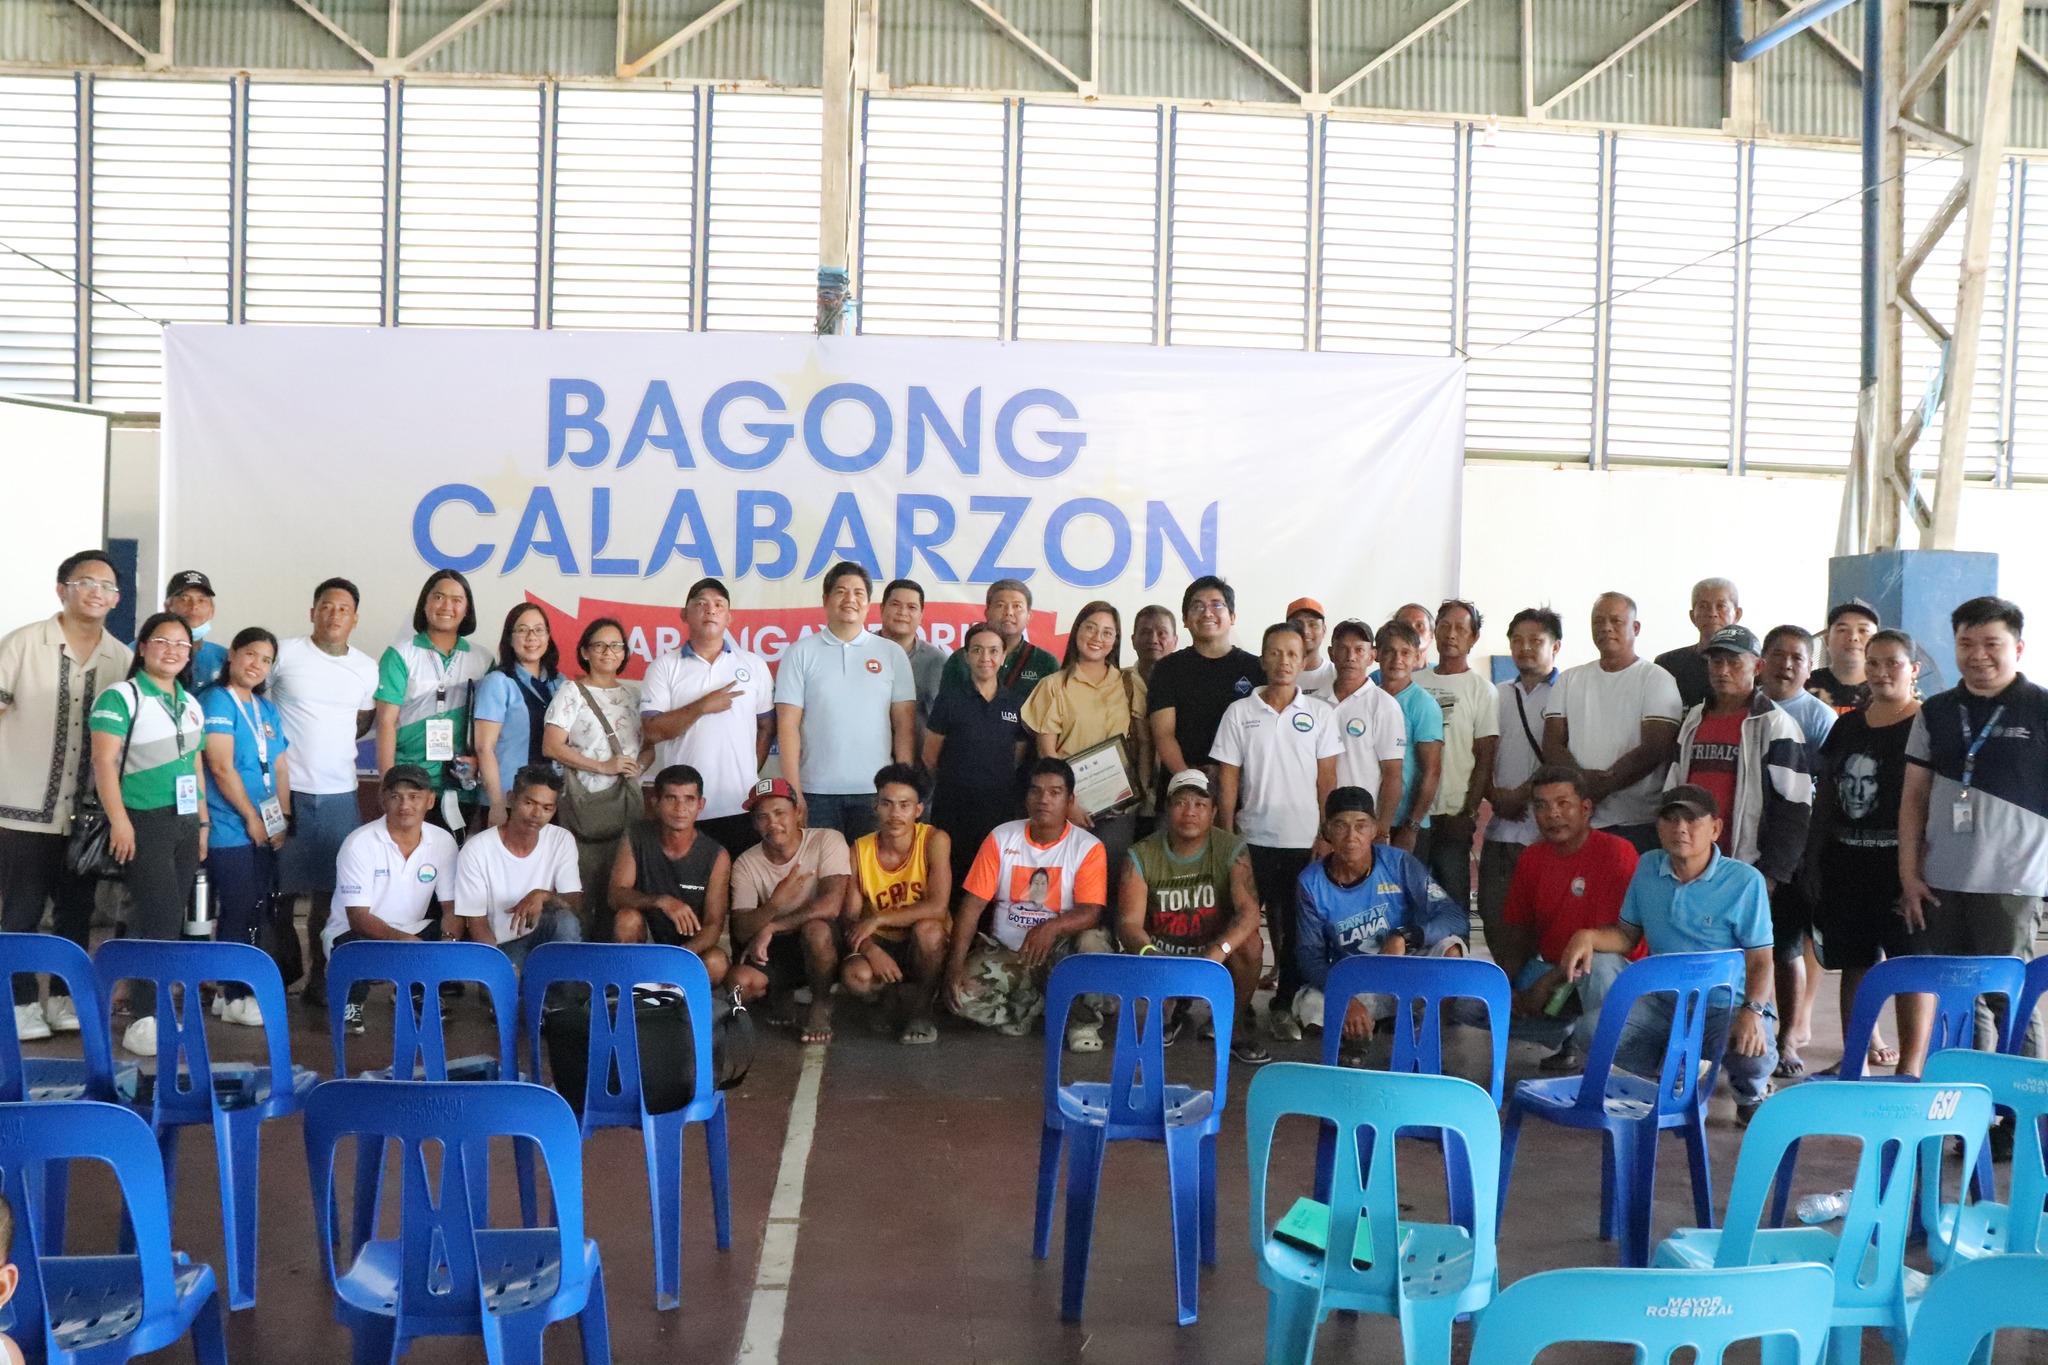 CALABARZON Featured Story